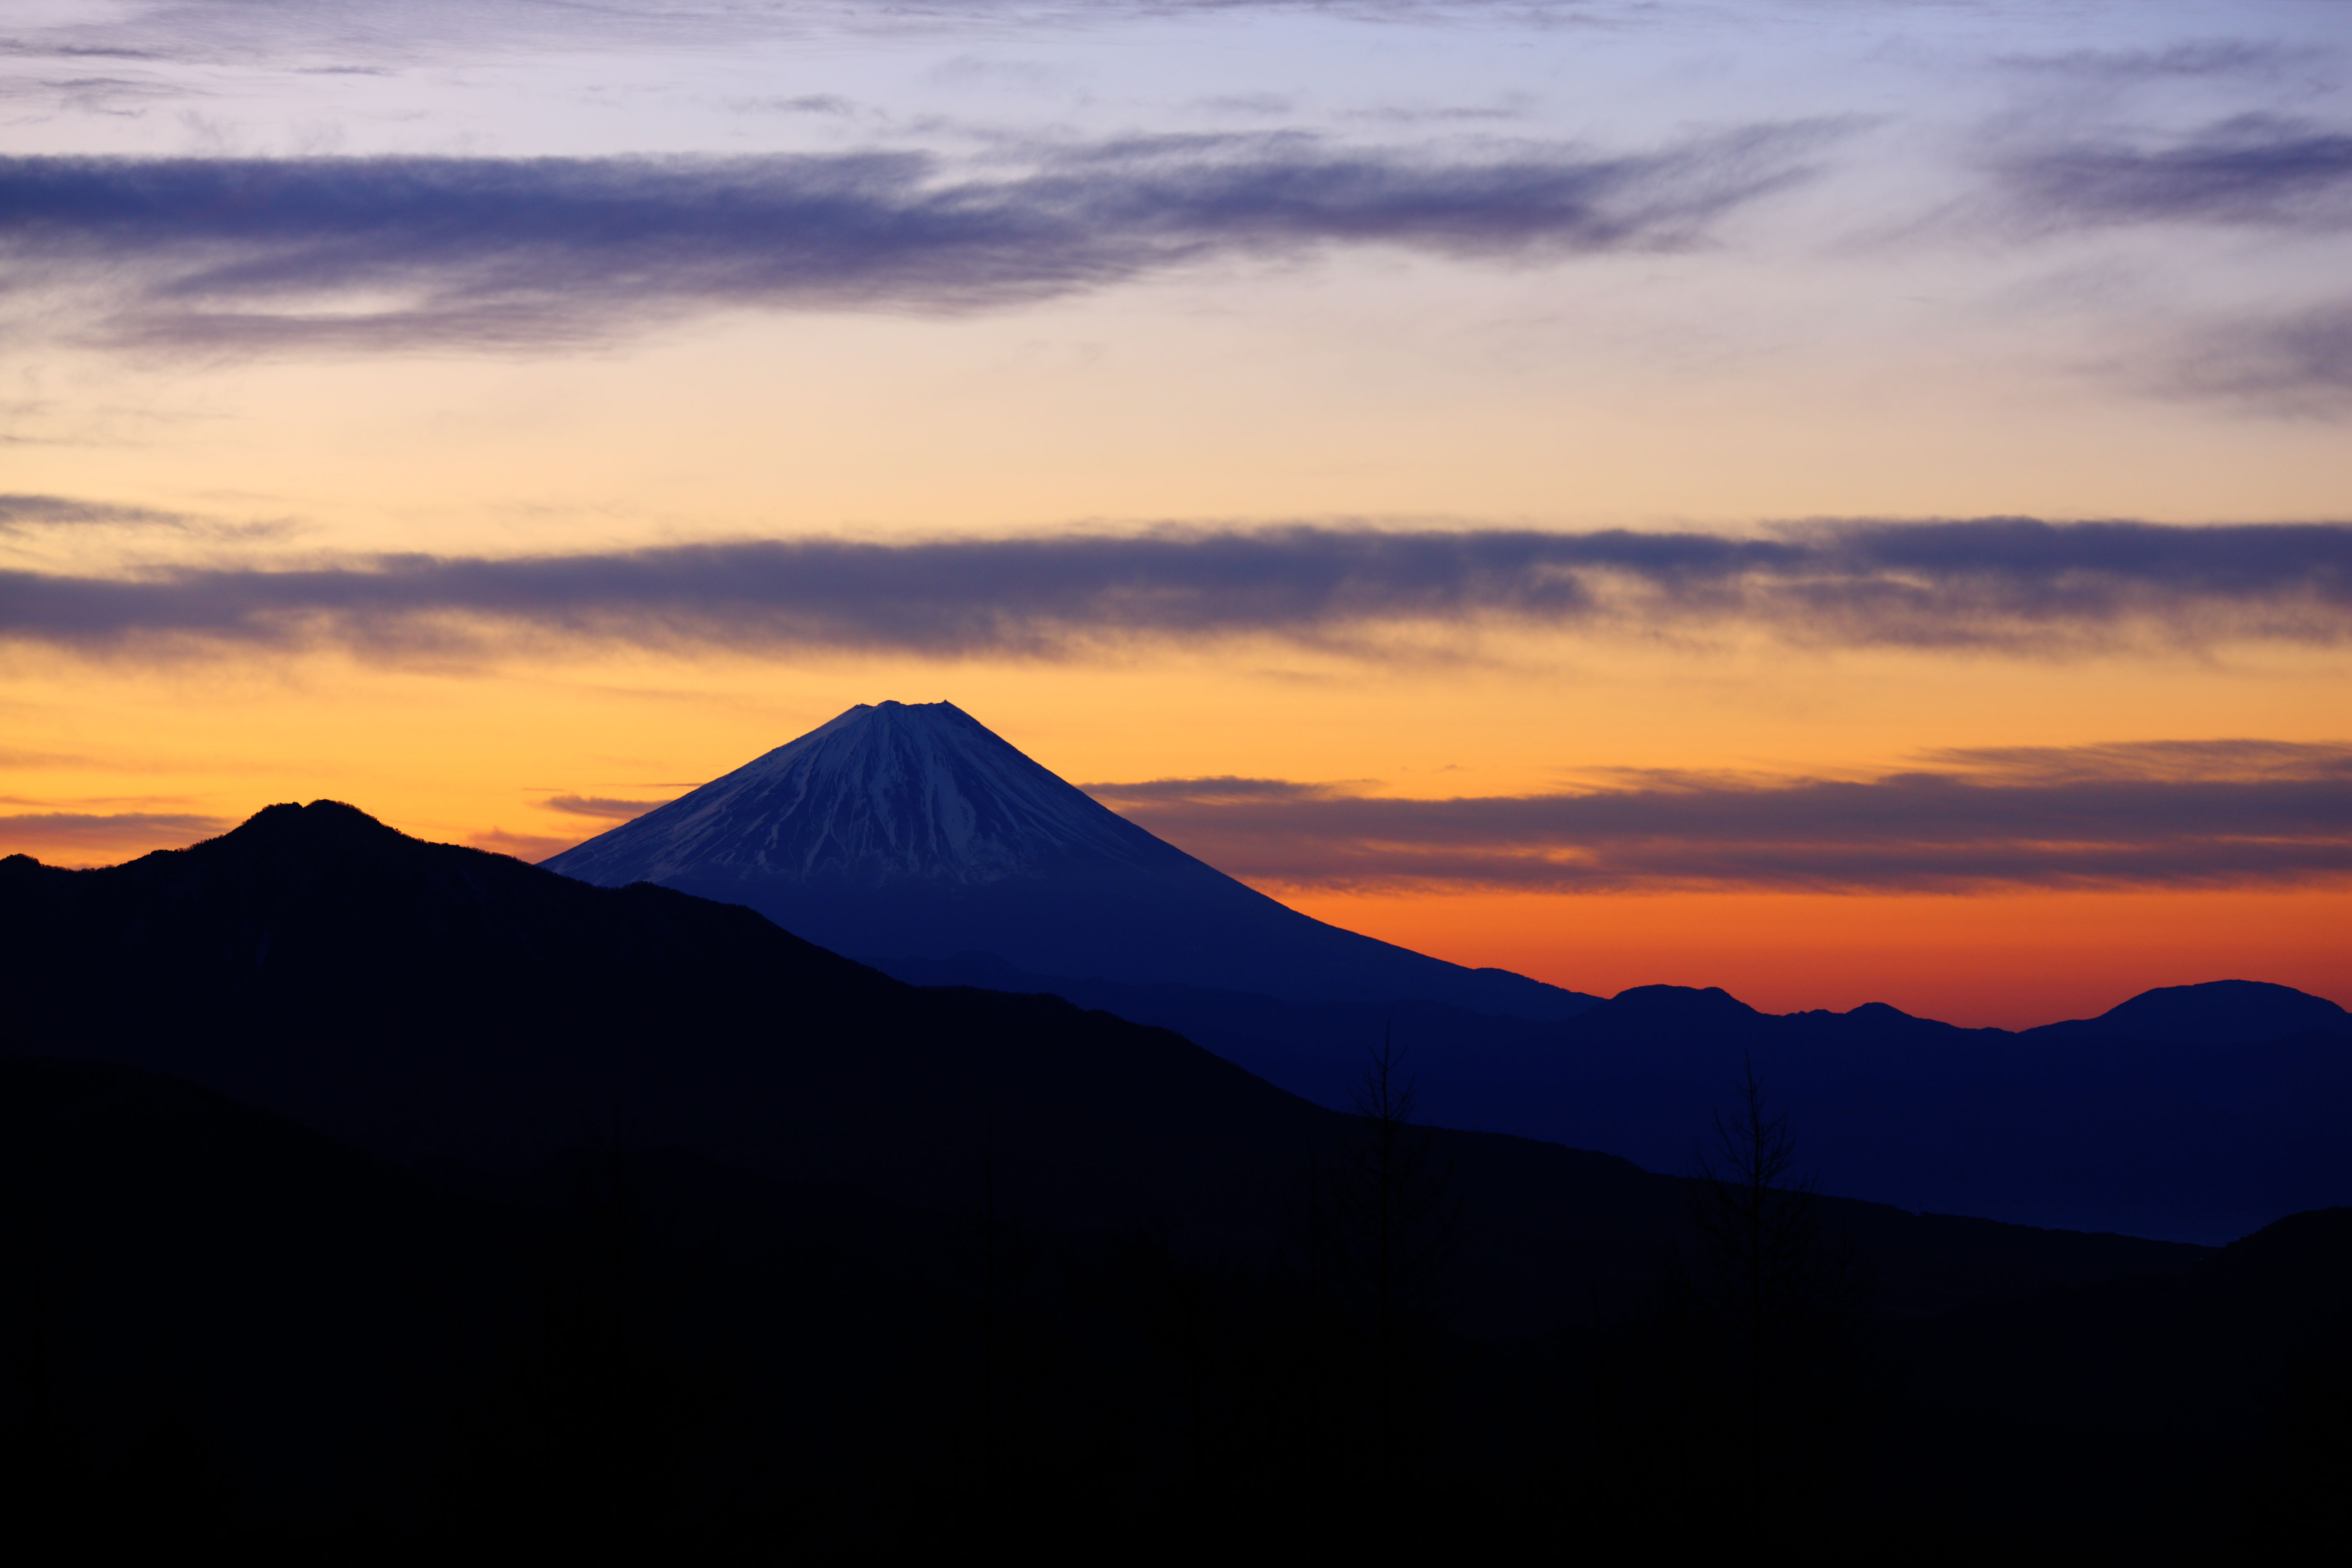 photo,material,free,landscape,picture,stock photo,Creative Commons,The morning of Mt. Fuji, Mt. Fuji, The morning glow, cloud, color